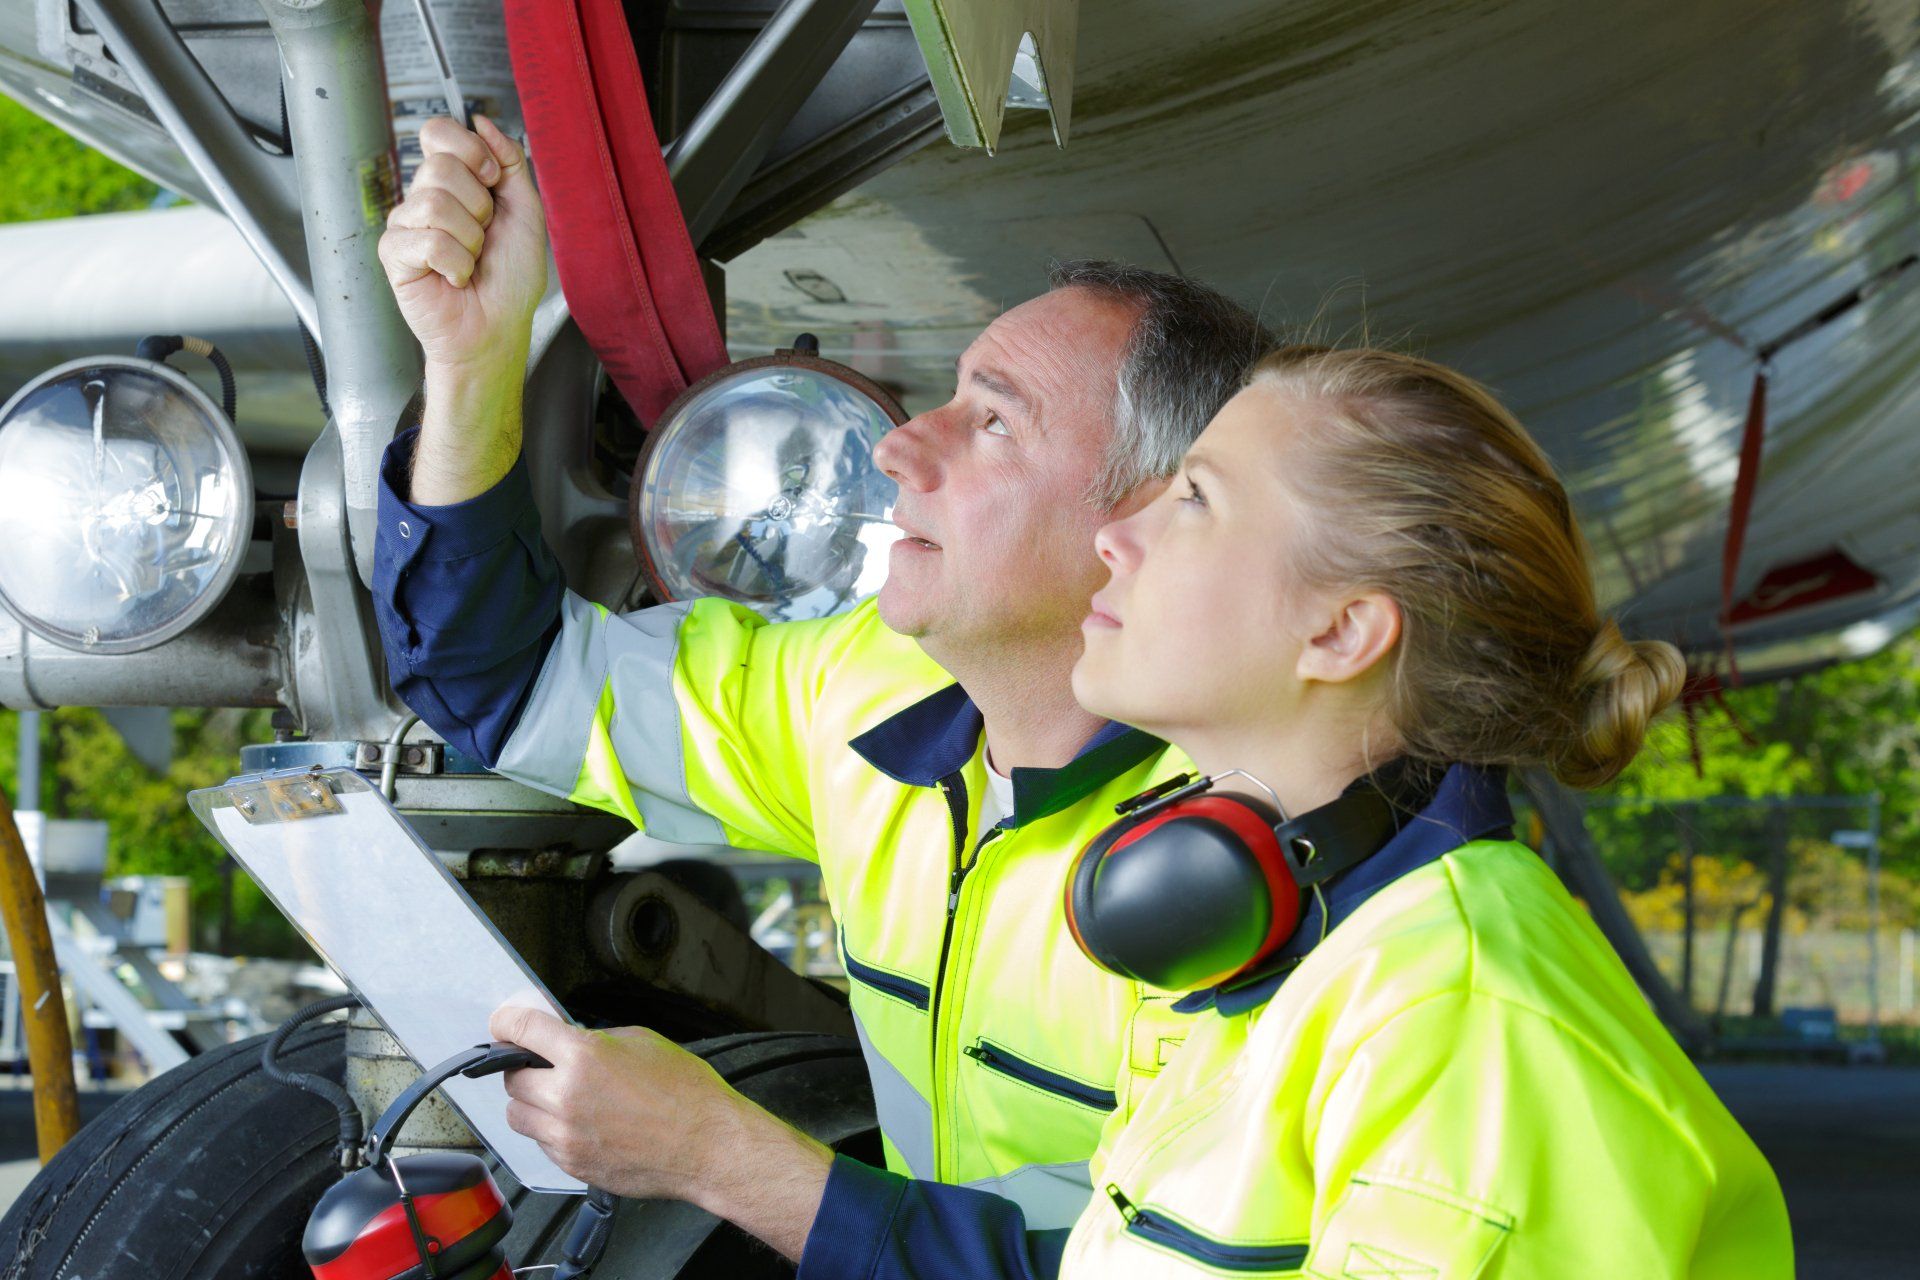 Two people inspecting an airframe